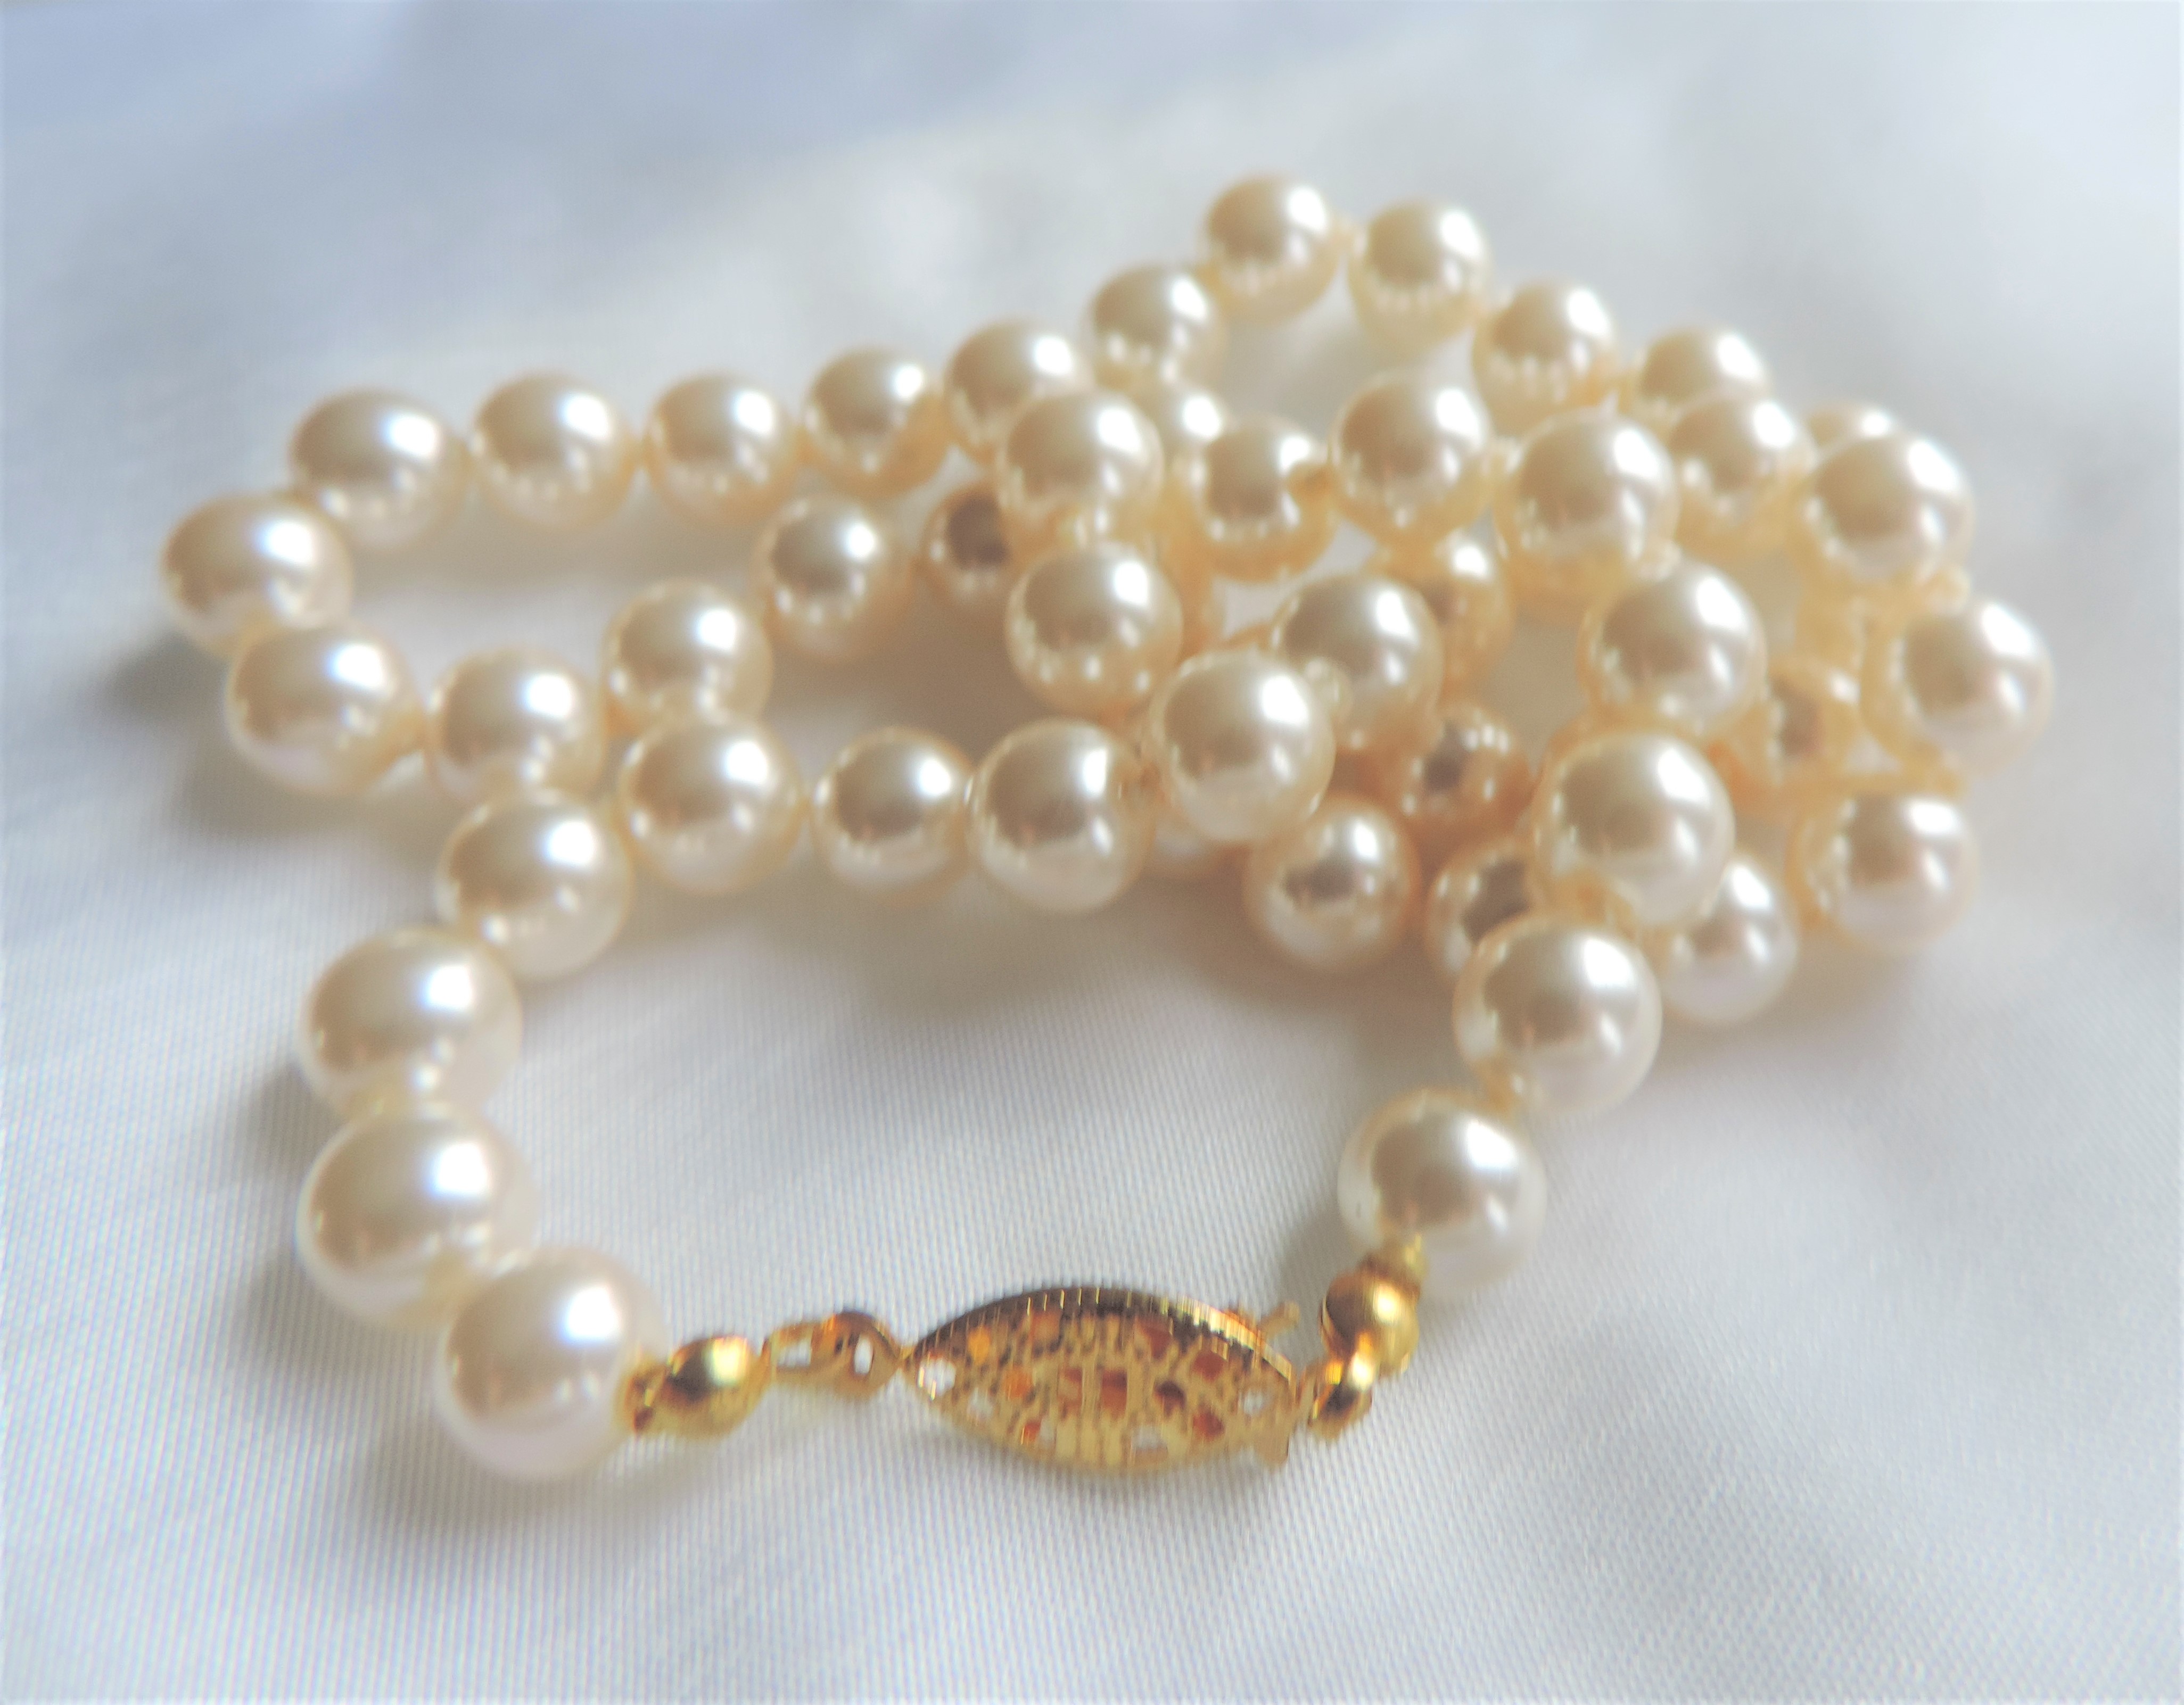 Single Strand 18 inch Pearl Necklace with Gift Pouch - Image 2 of 3